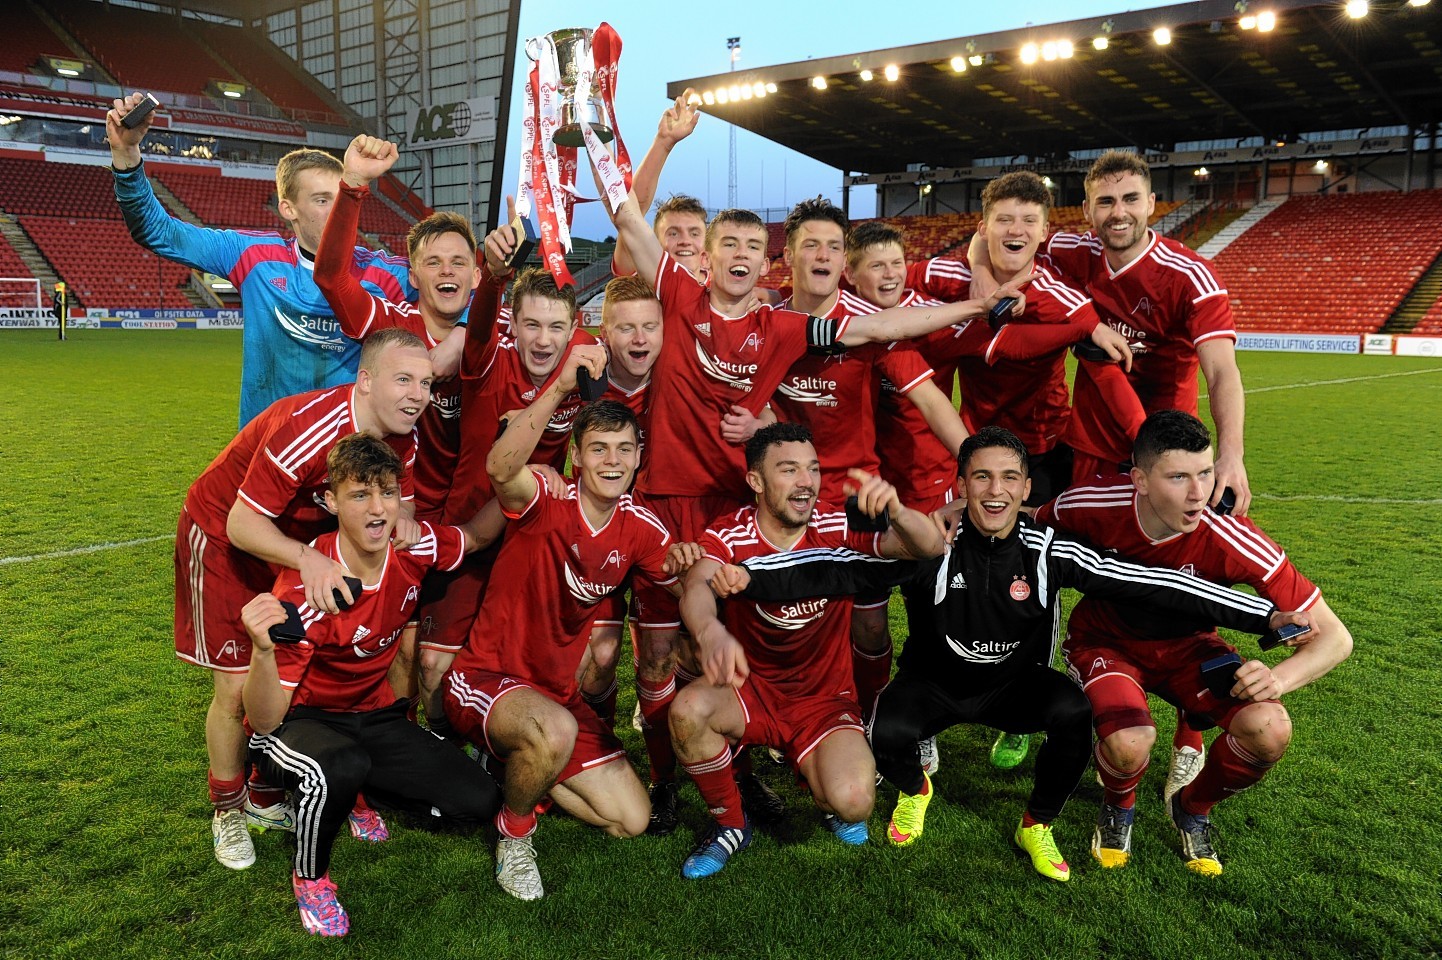 The Dons winning the Development League was one of a number of highlights in the 2014/15 season